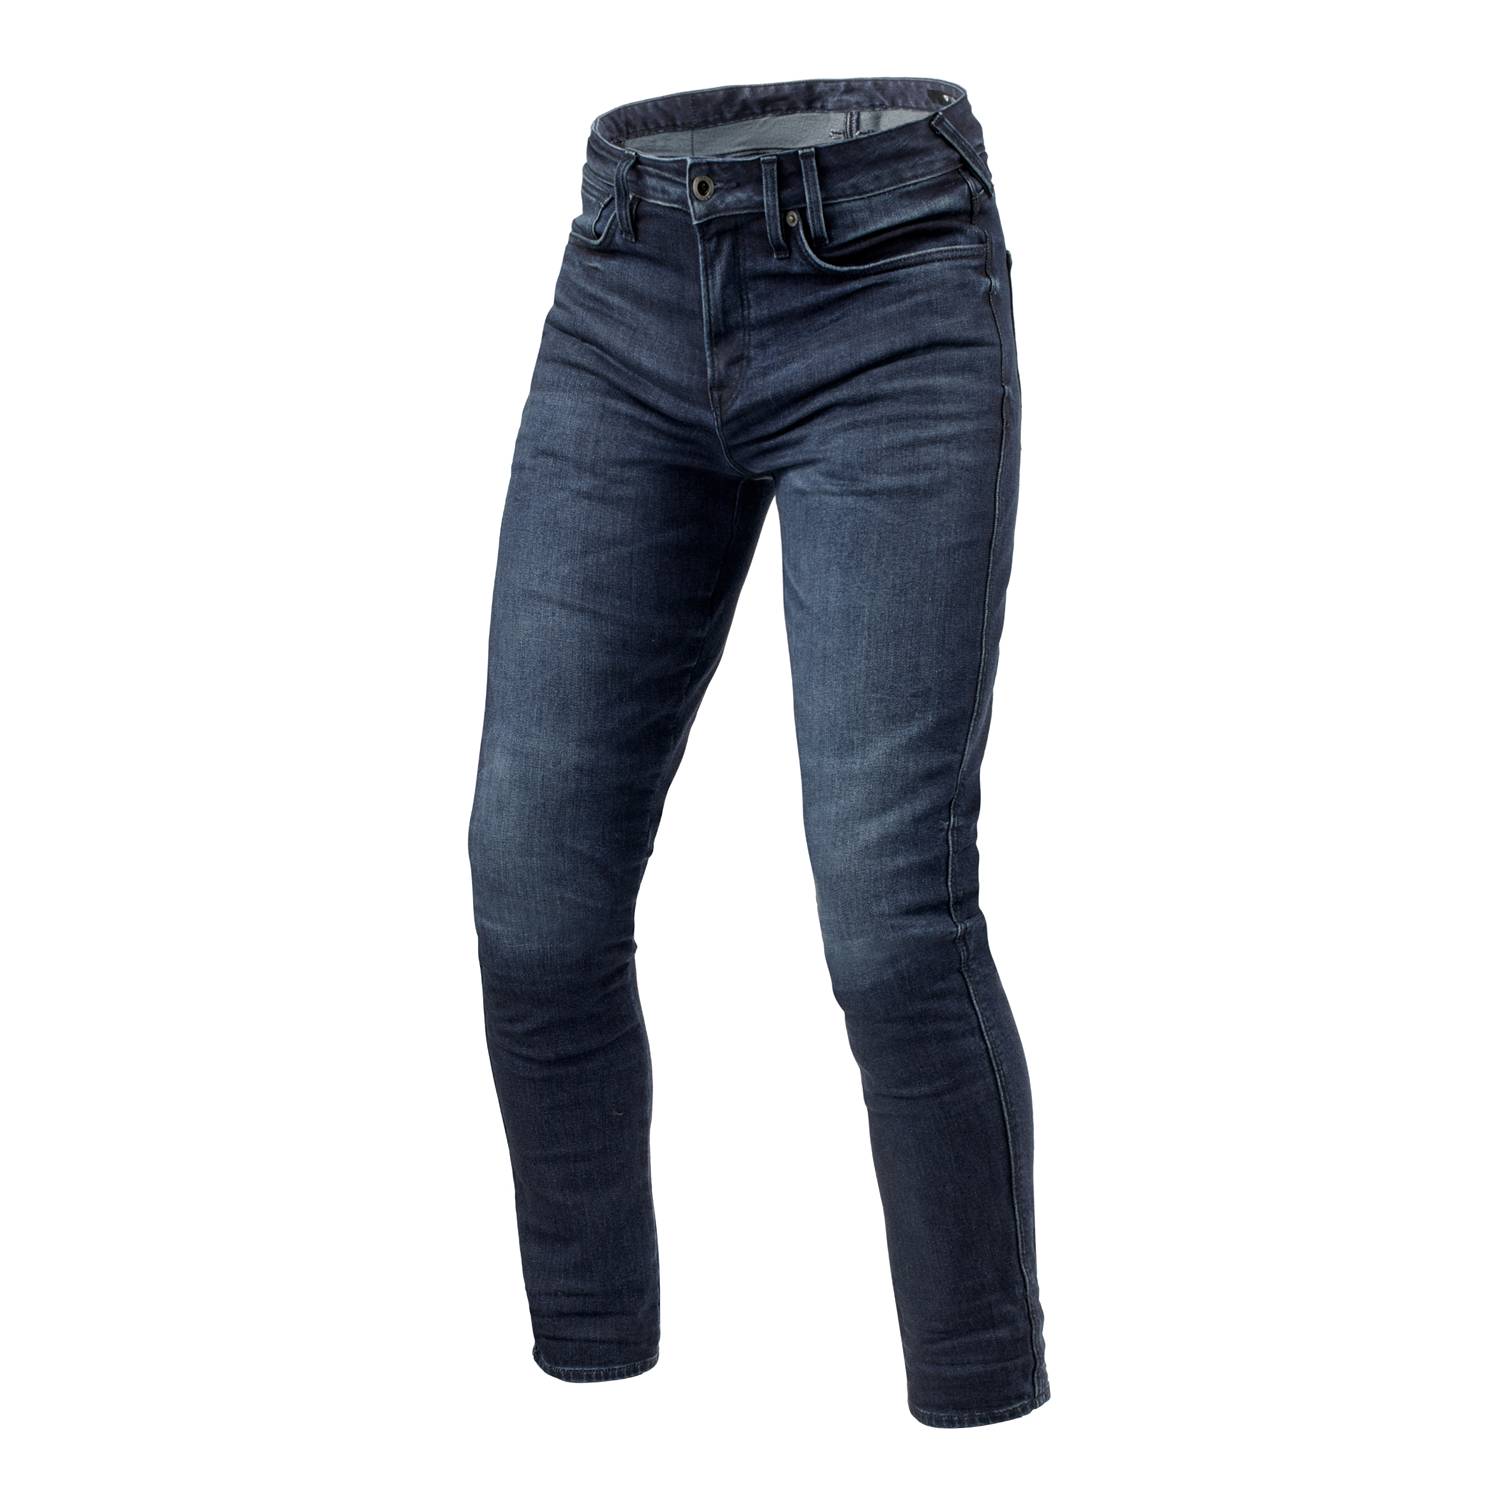 Image of REV'IT! Jeans Carlin SK Dark Blue Used L32 Motorcycle Jeans Size L32/W36 ID 8700001376518